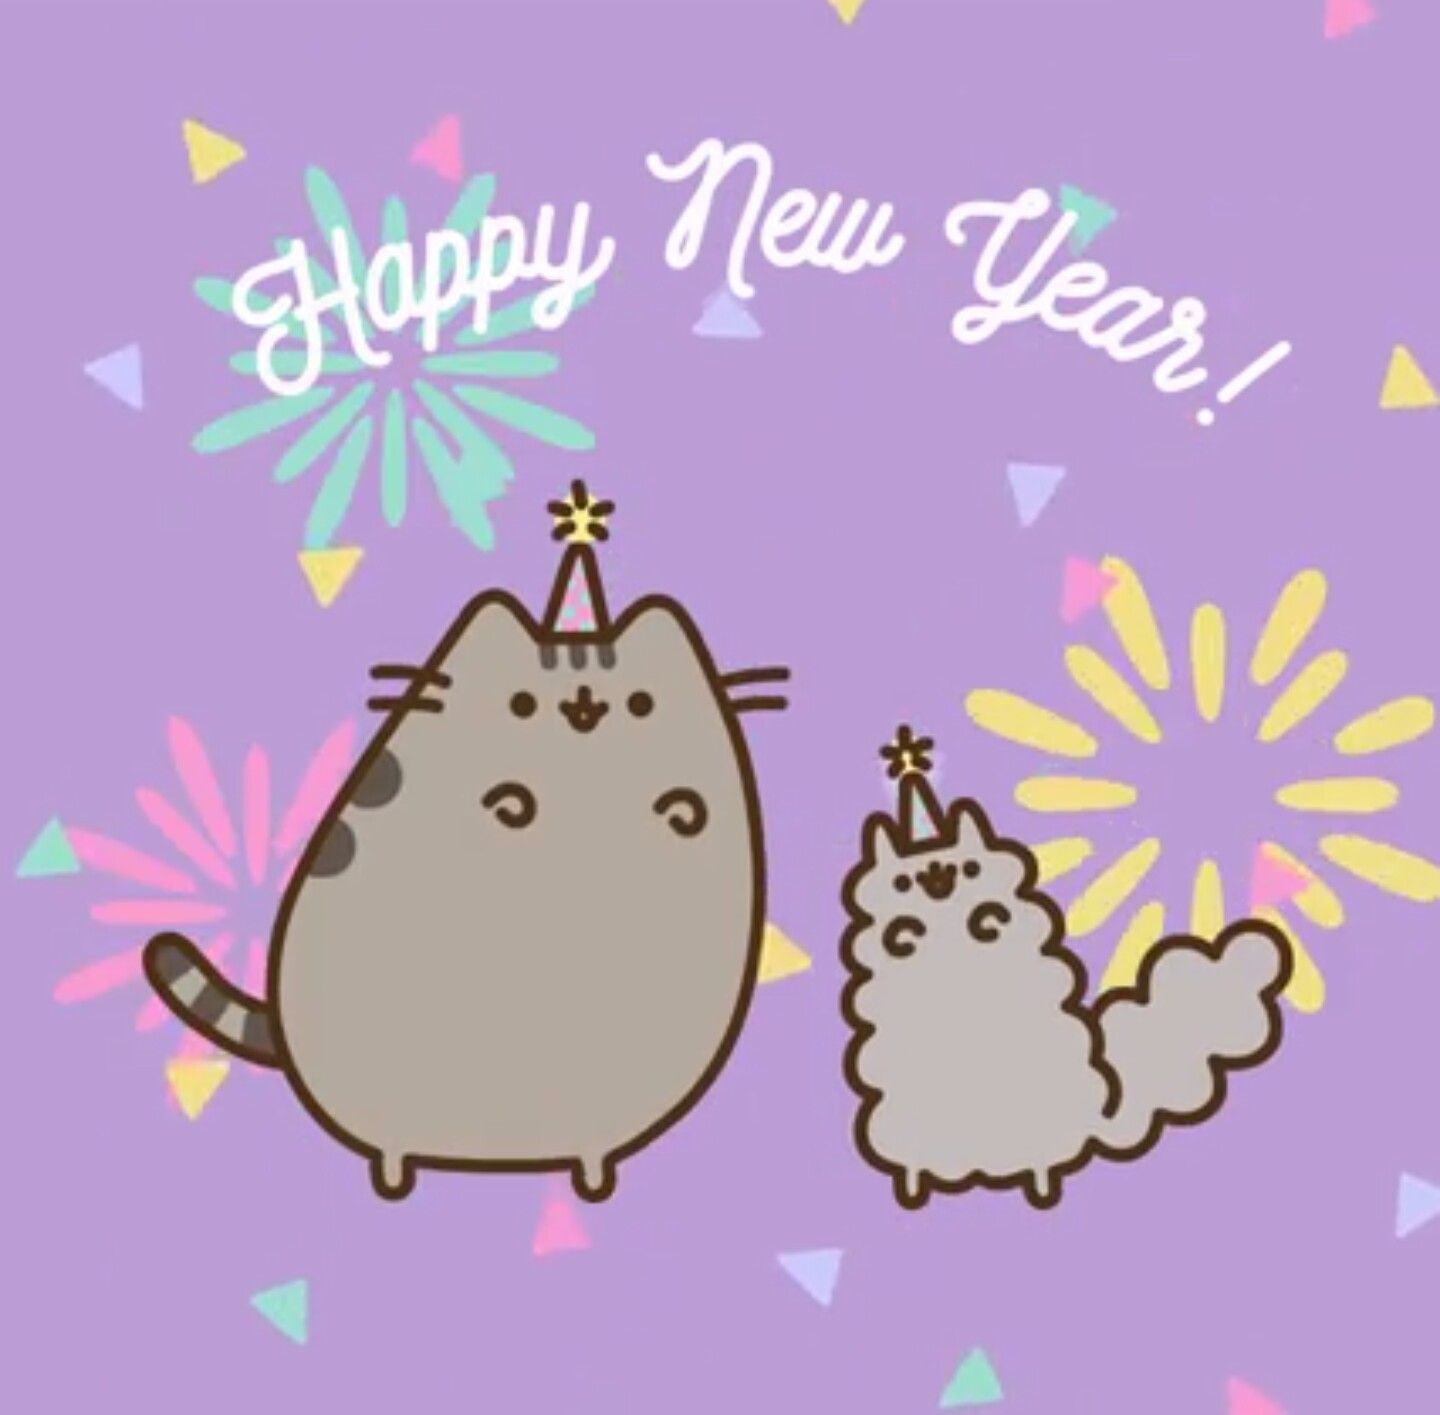 Happy New Year!. Pusheen cat, Happy new year picture, Christmas wallpaper